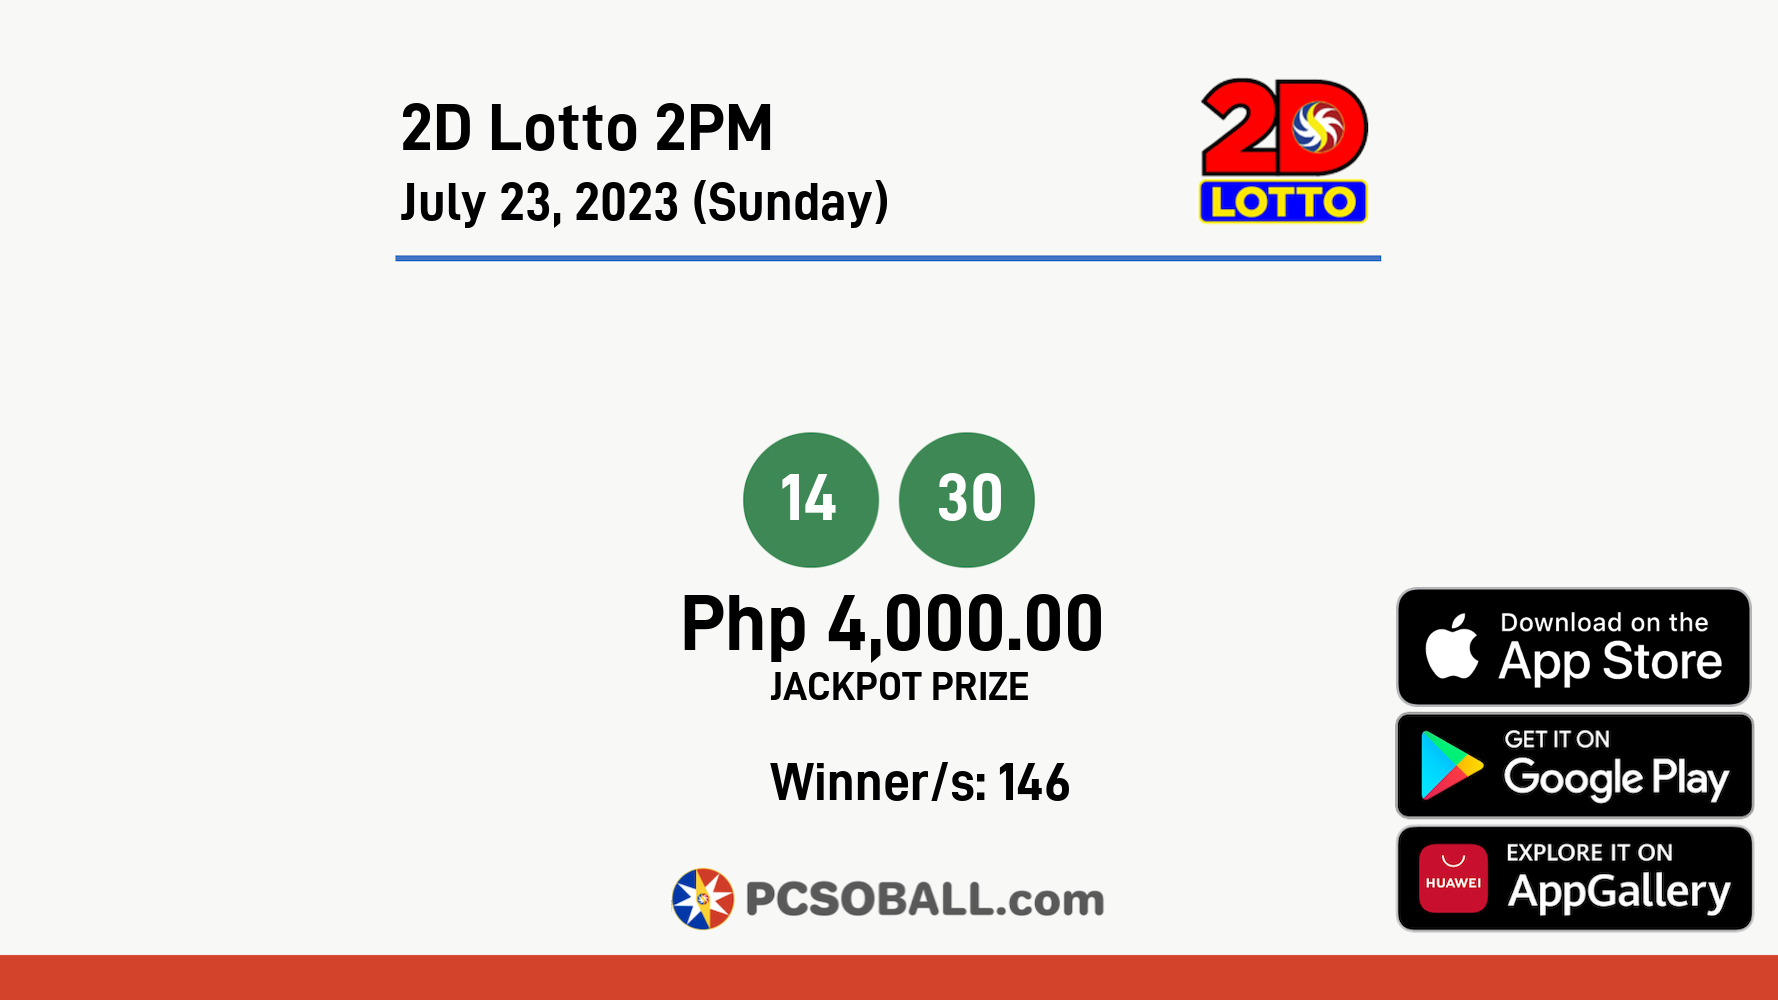 2D Lotto 2PM July 23, 2023 (Sunday) Result